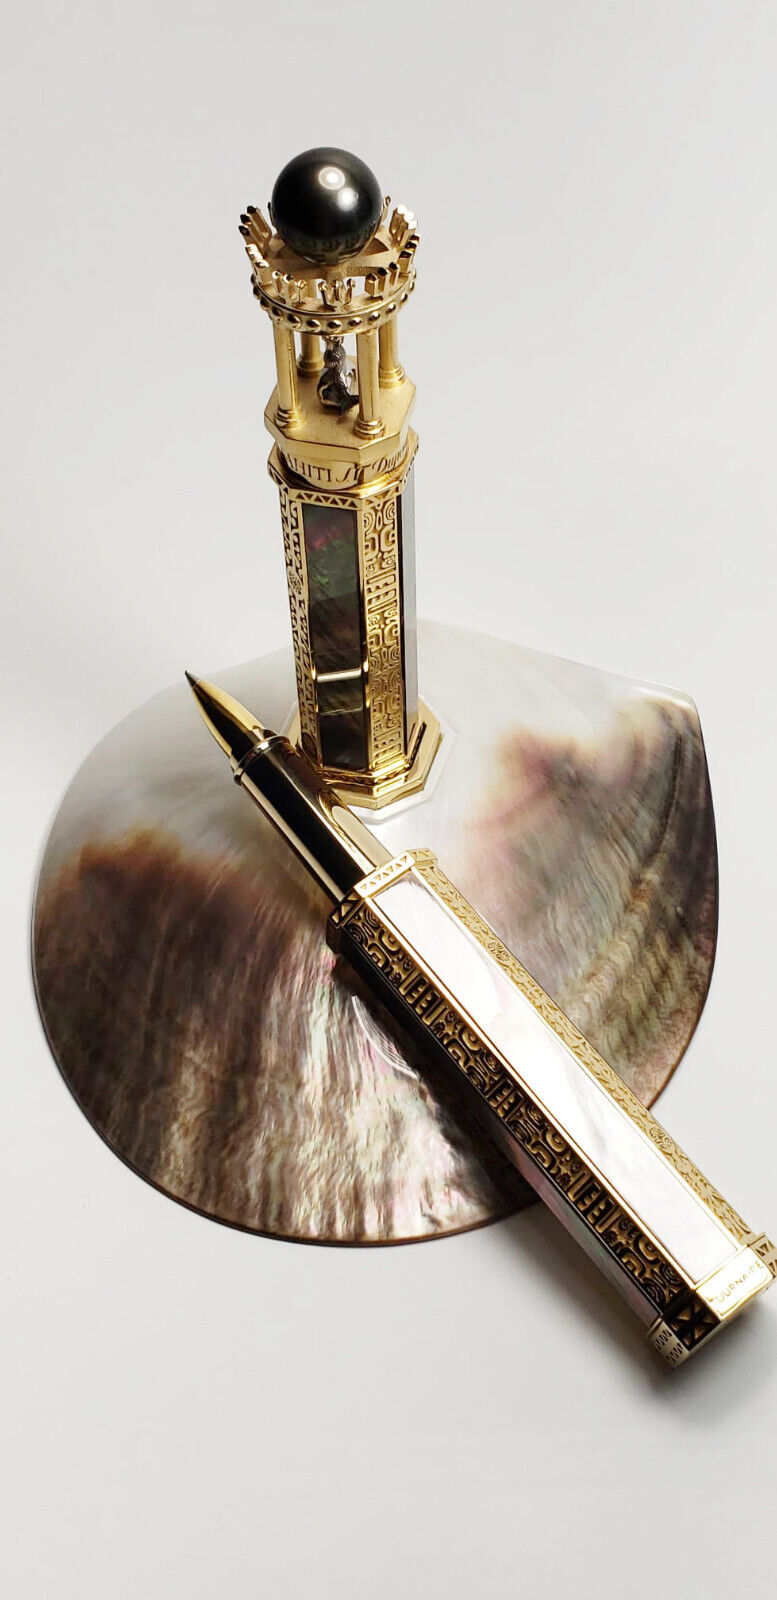 S.T. Dupont King of Pearl by Philippe Tournaire Limited Edition R/Ball 30 made